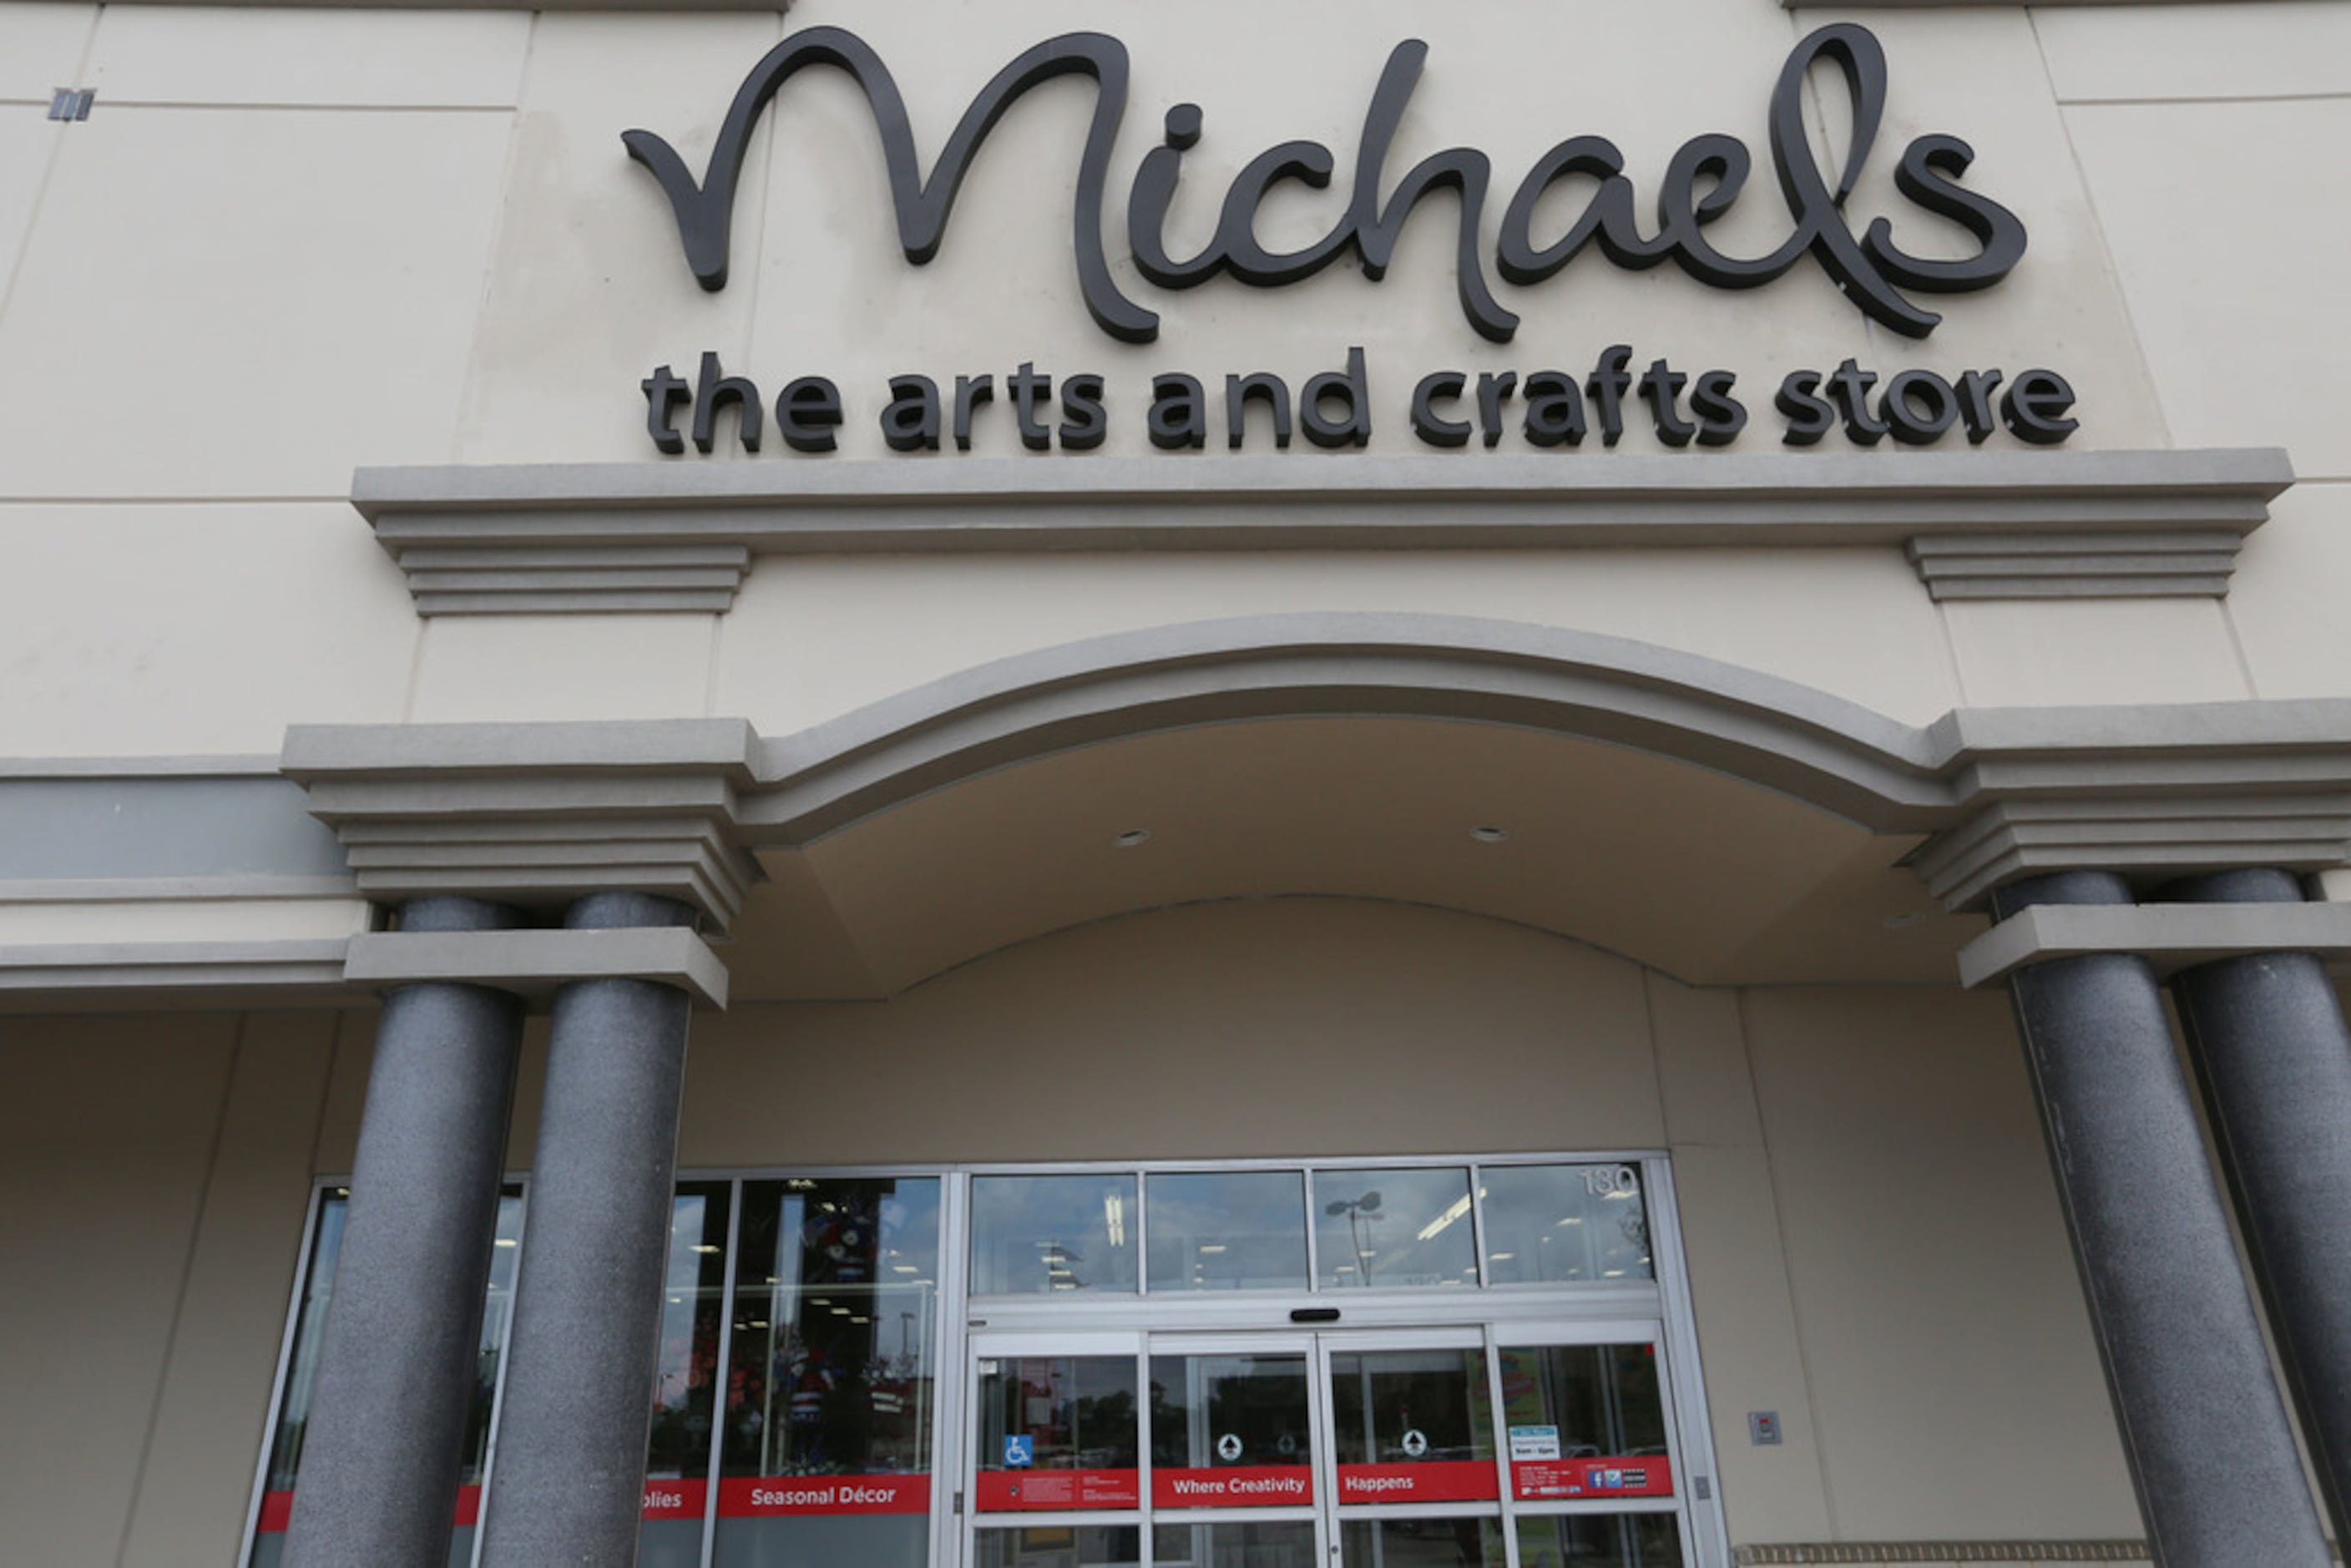 Michaels - Arts and Crafts Store